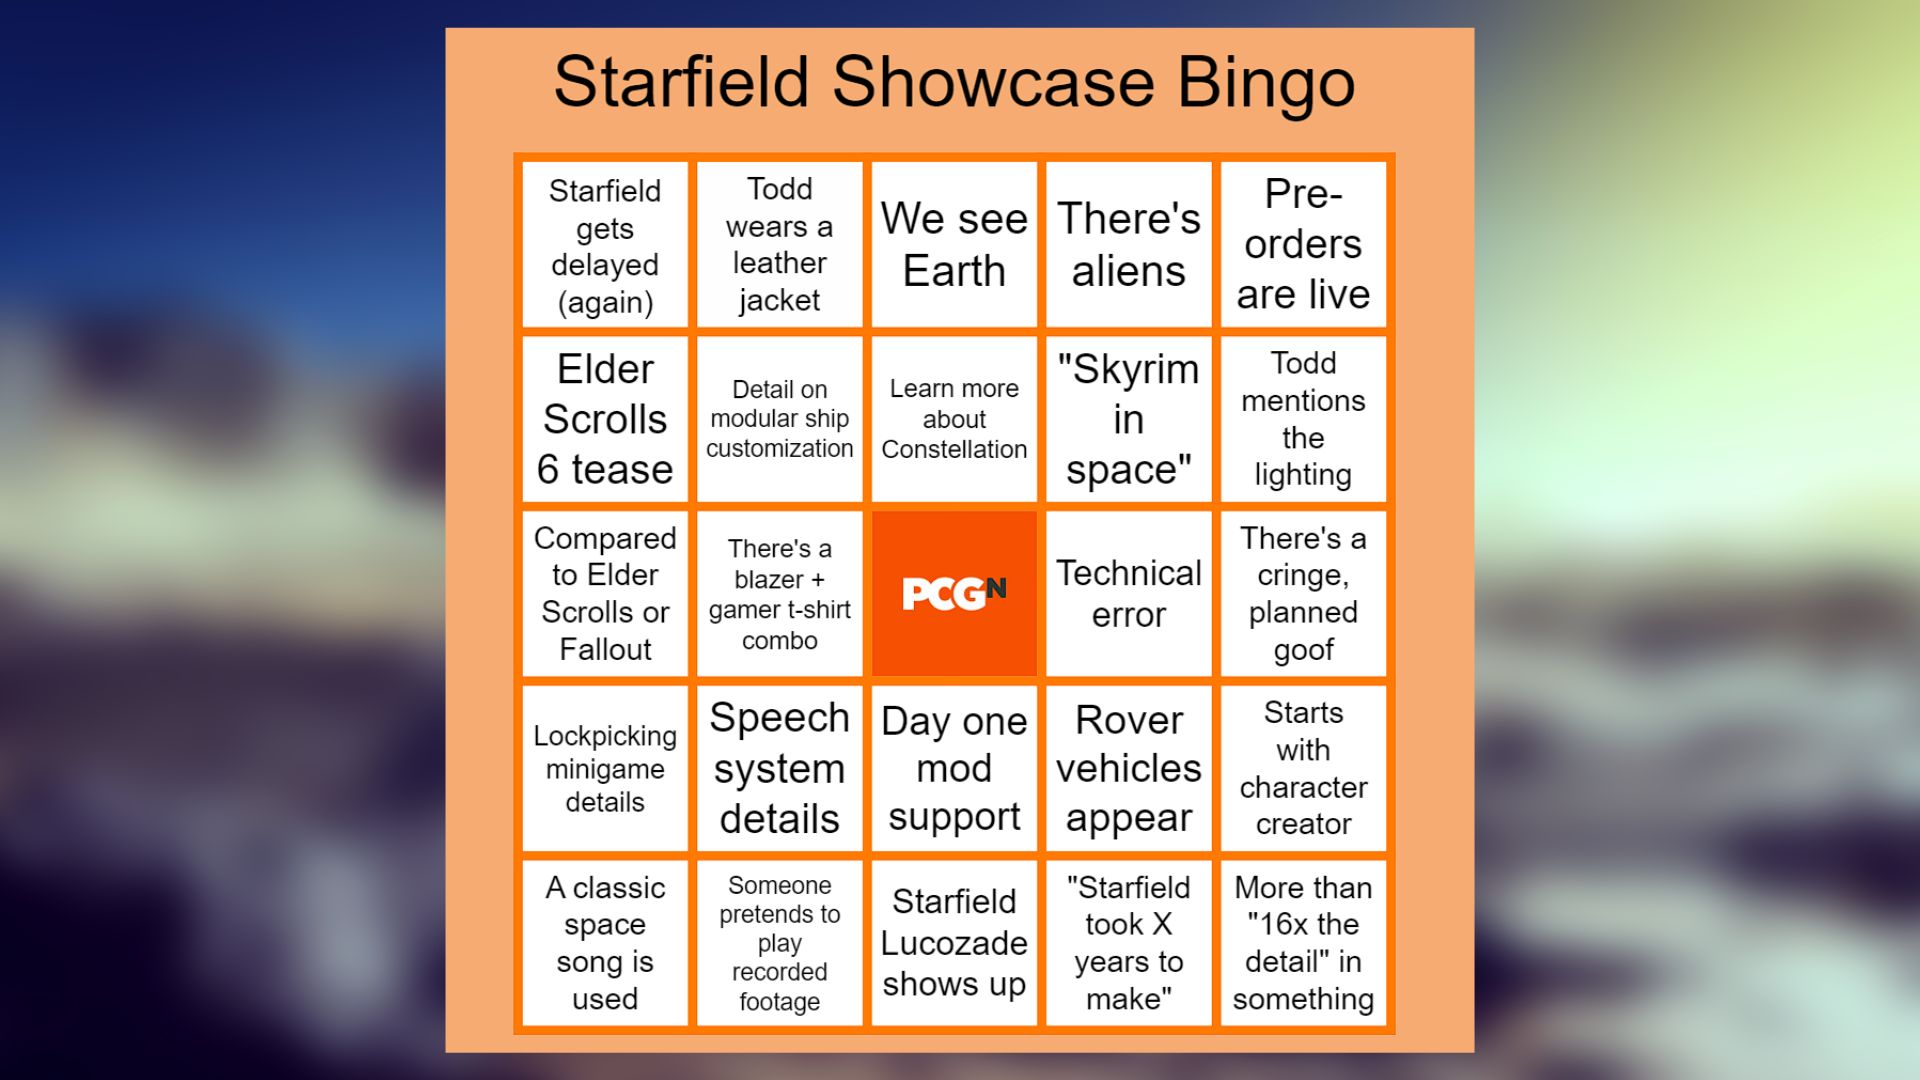 join-us-for-a-game-of-starfield-showcase-bingo-nation-online